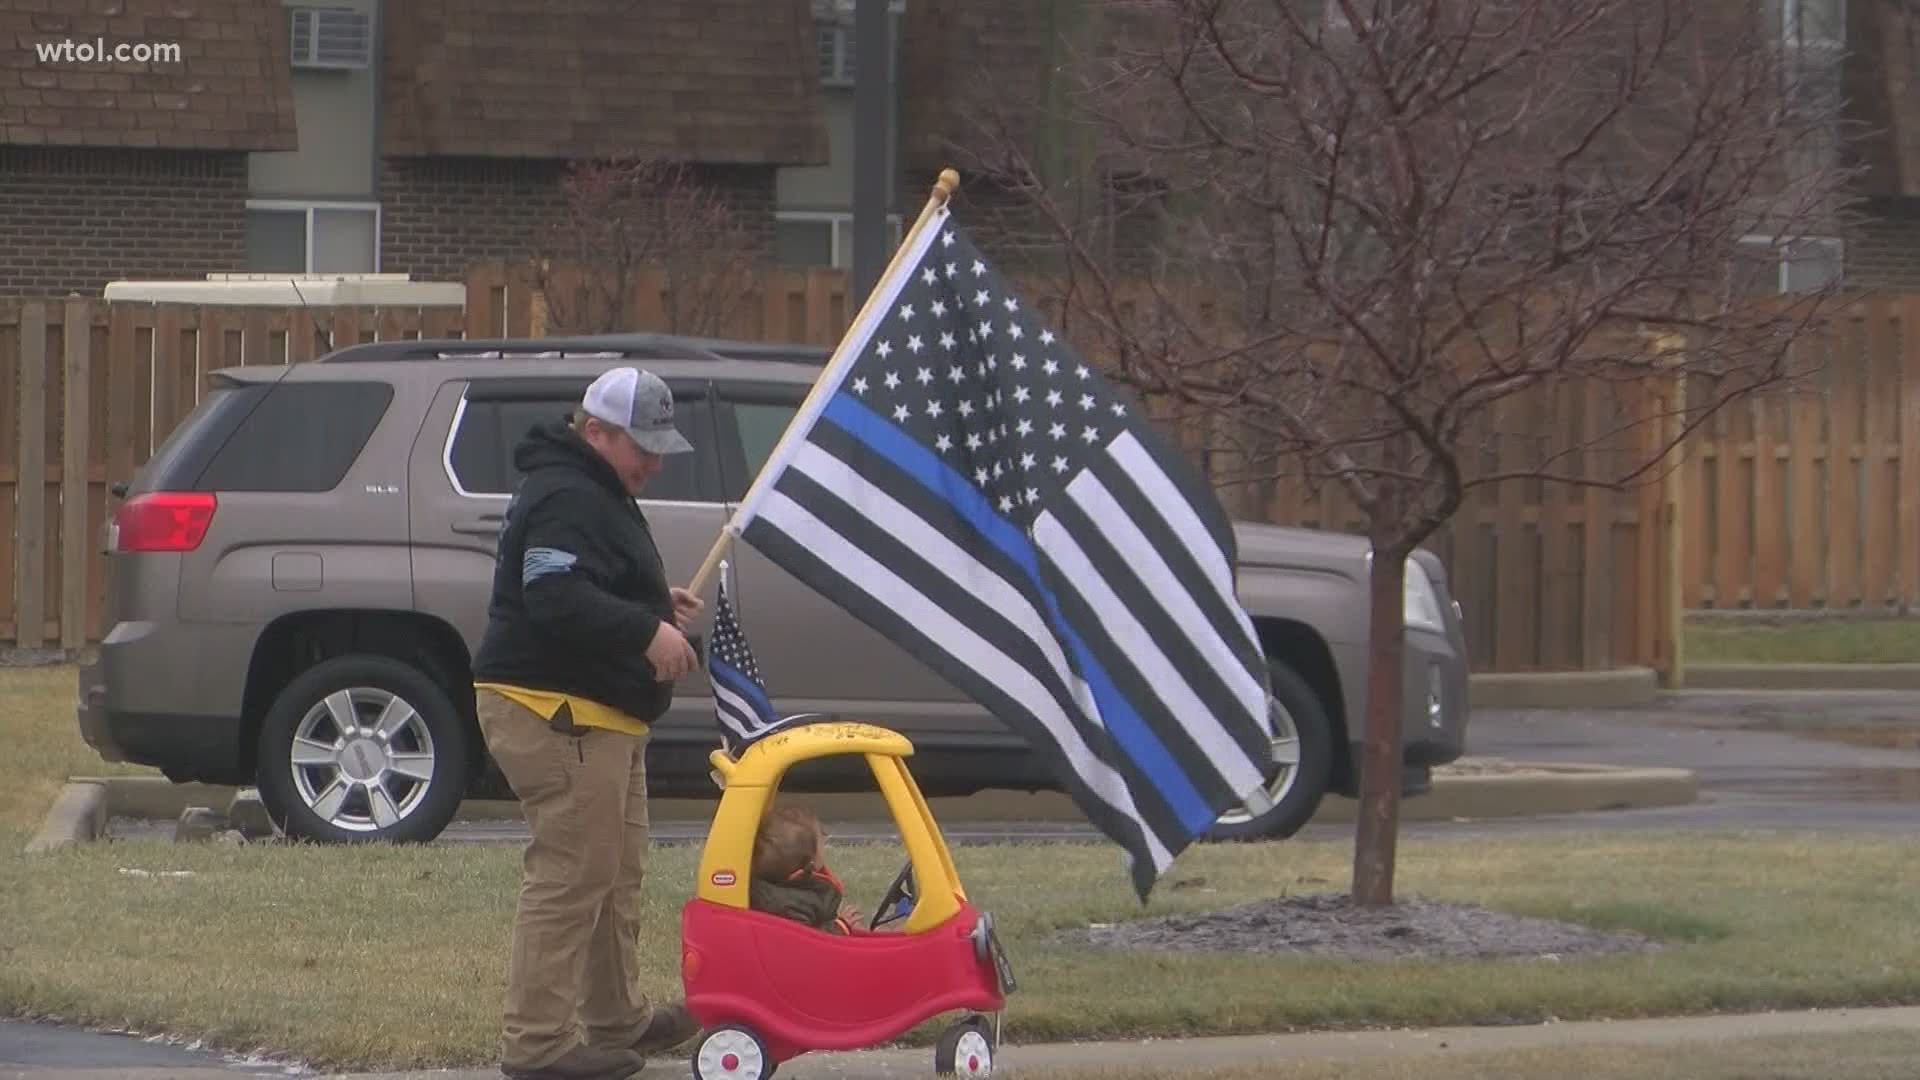 The community gathered today as a fallen officer was laid to rest. We remember his life and legacy as an officer and a proud Toledoan as we recap the day's events.